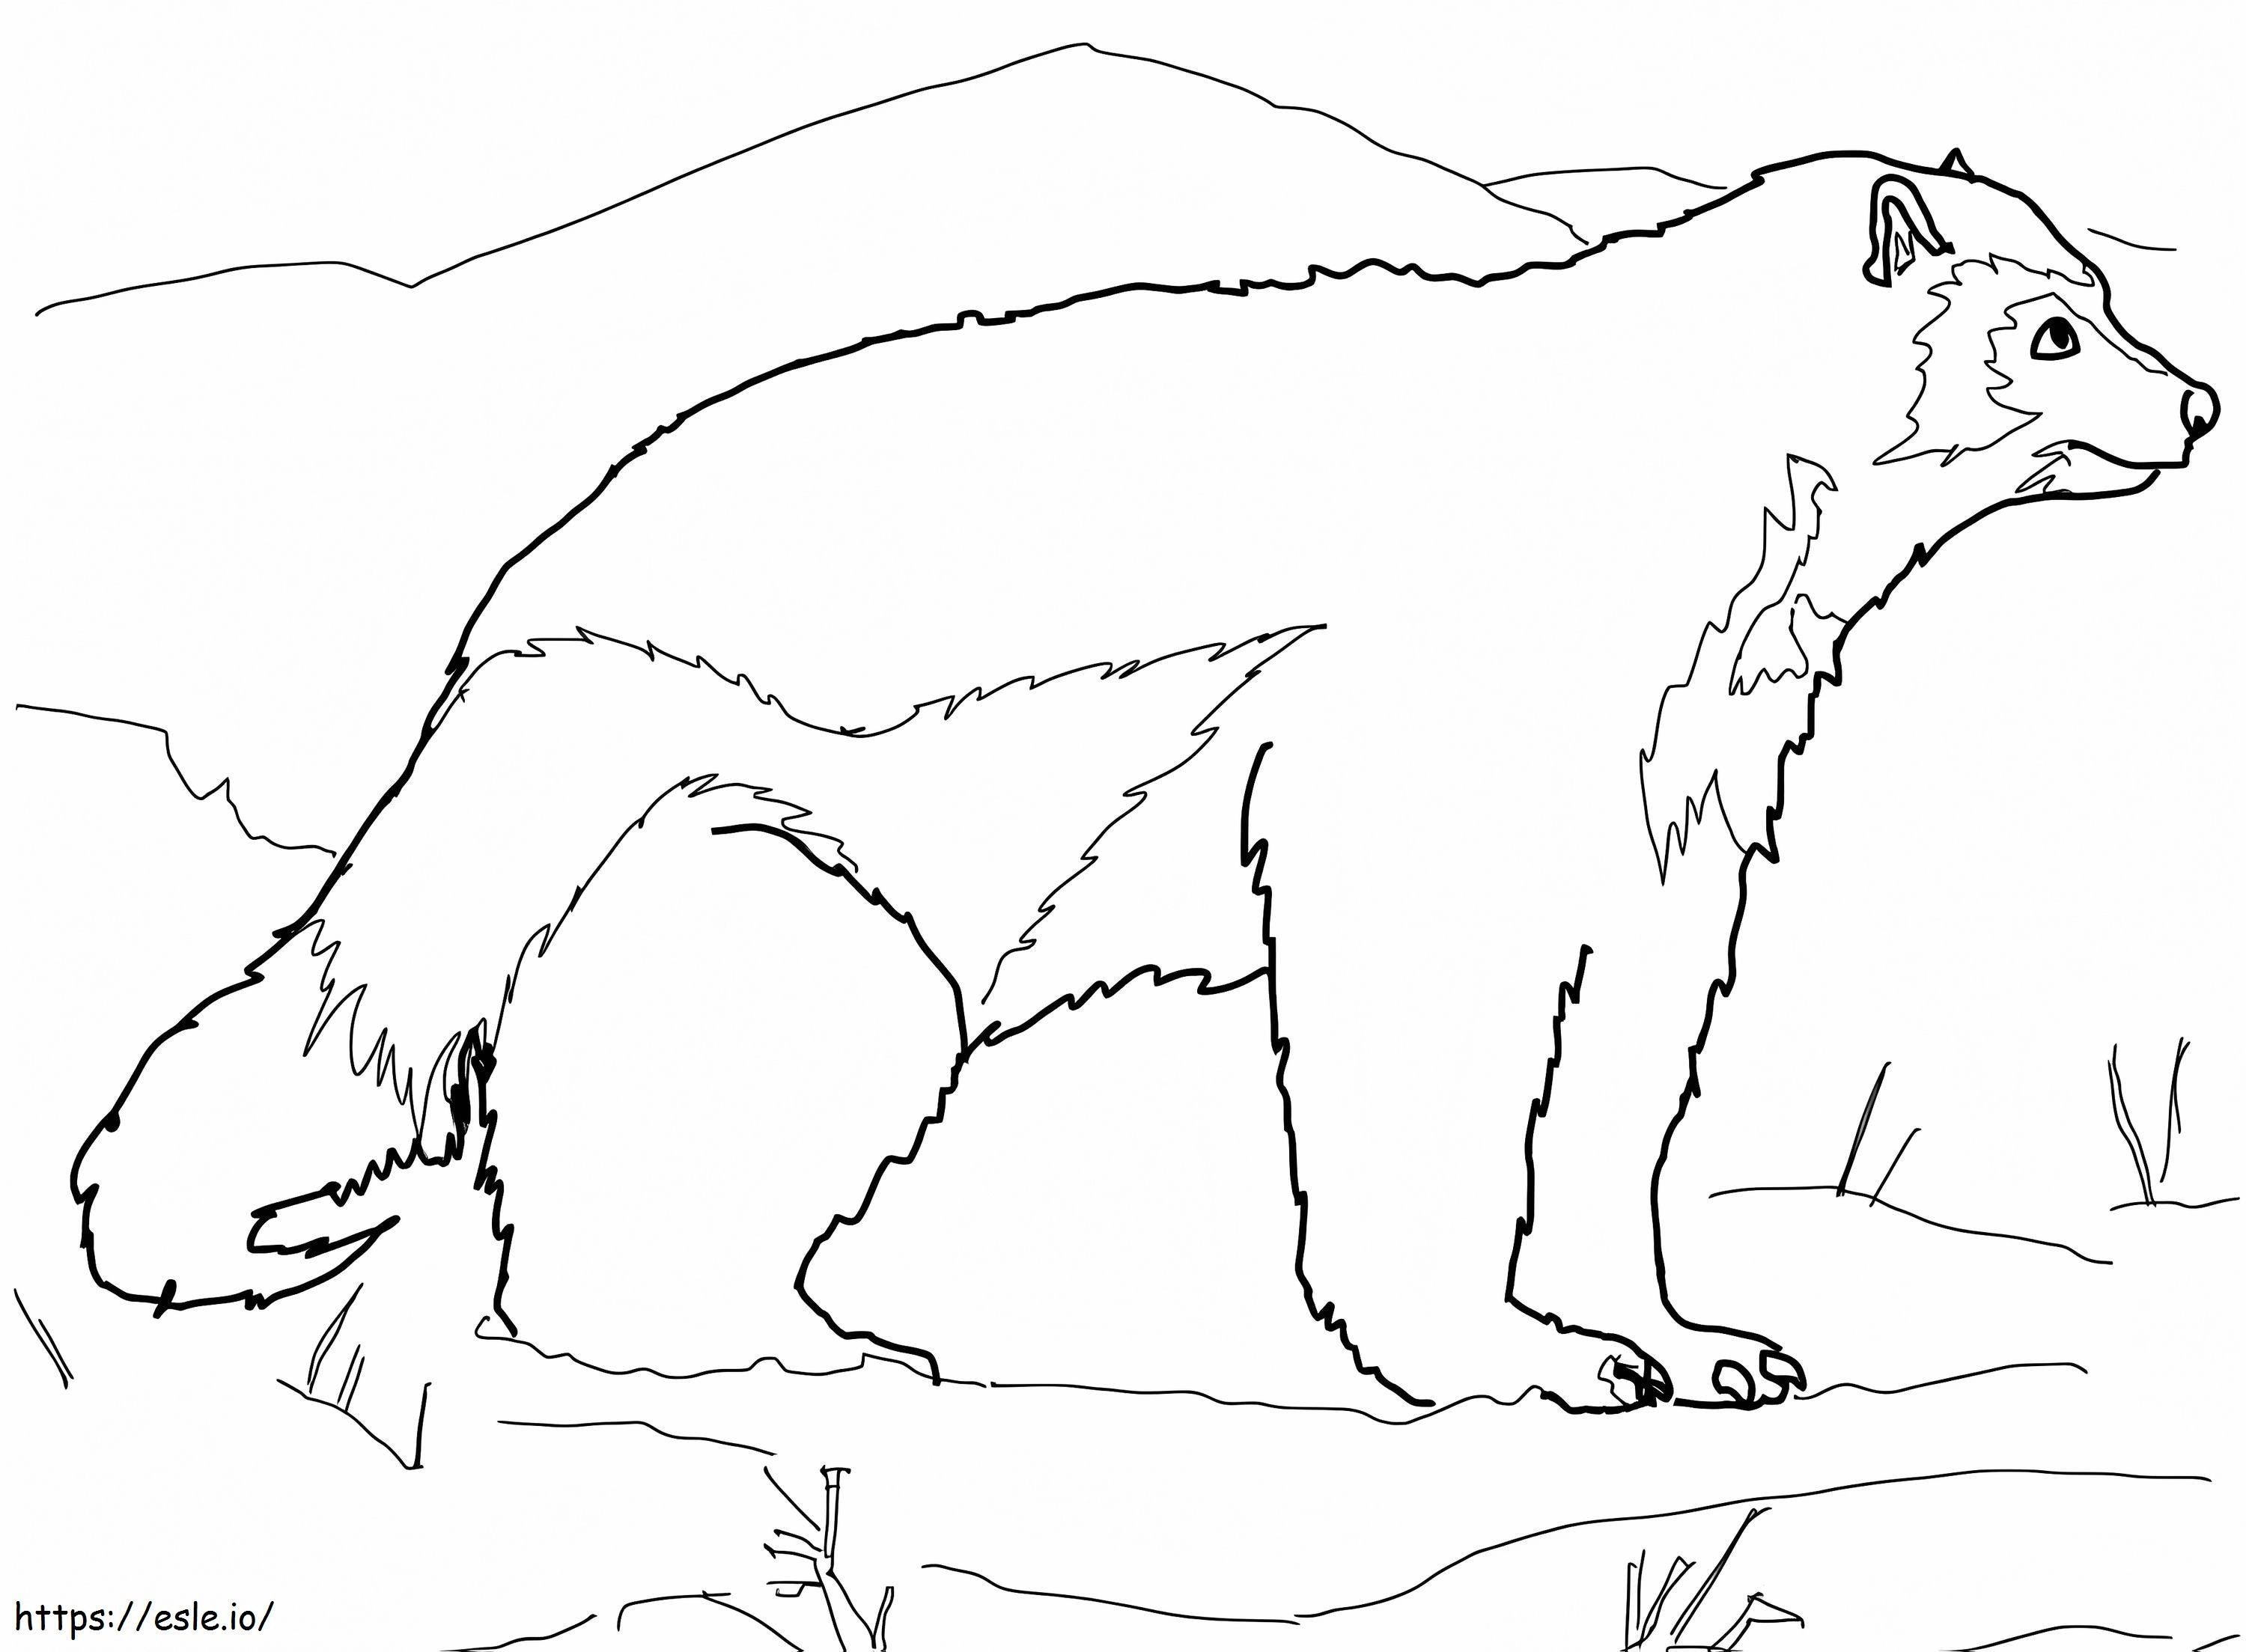 Arctic Wolverine coloring page